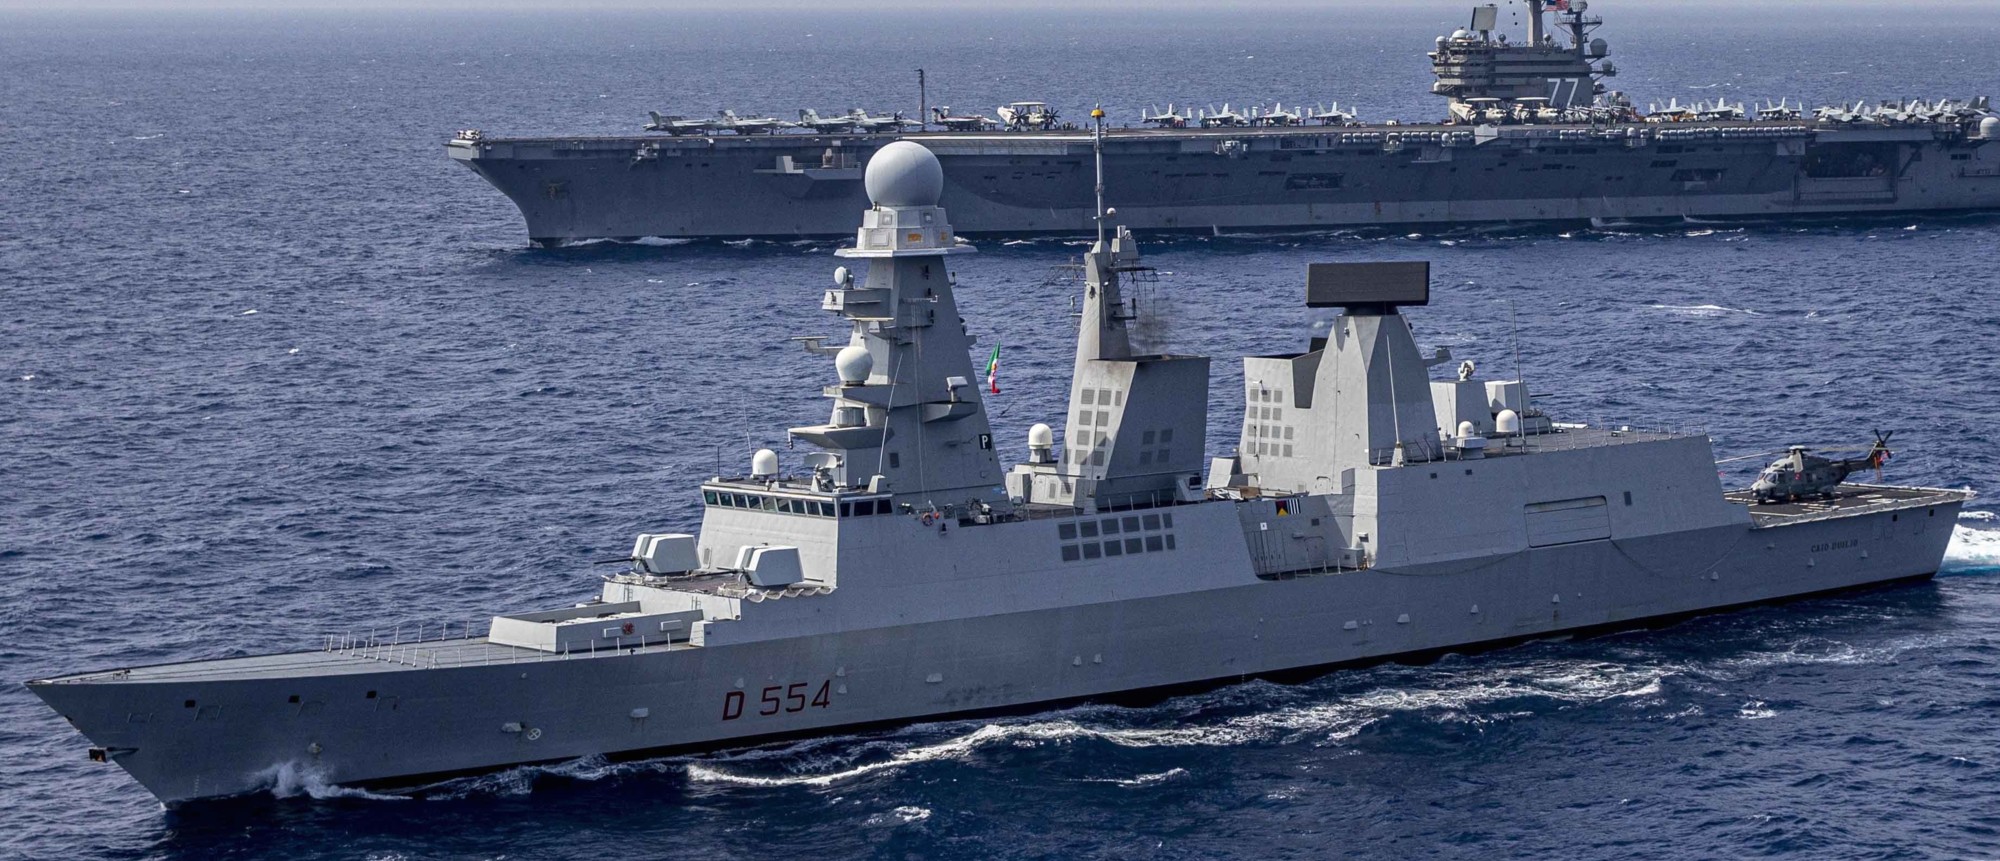 d-554 caio duilio its nave horizon class guided missile destroyer ddgh italian navy marina militare 42